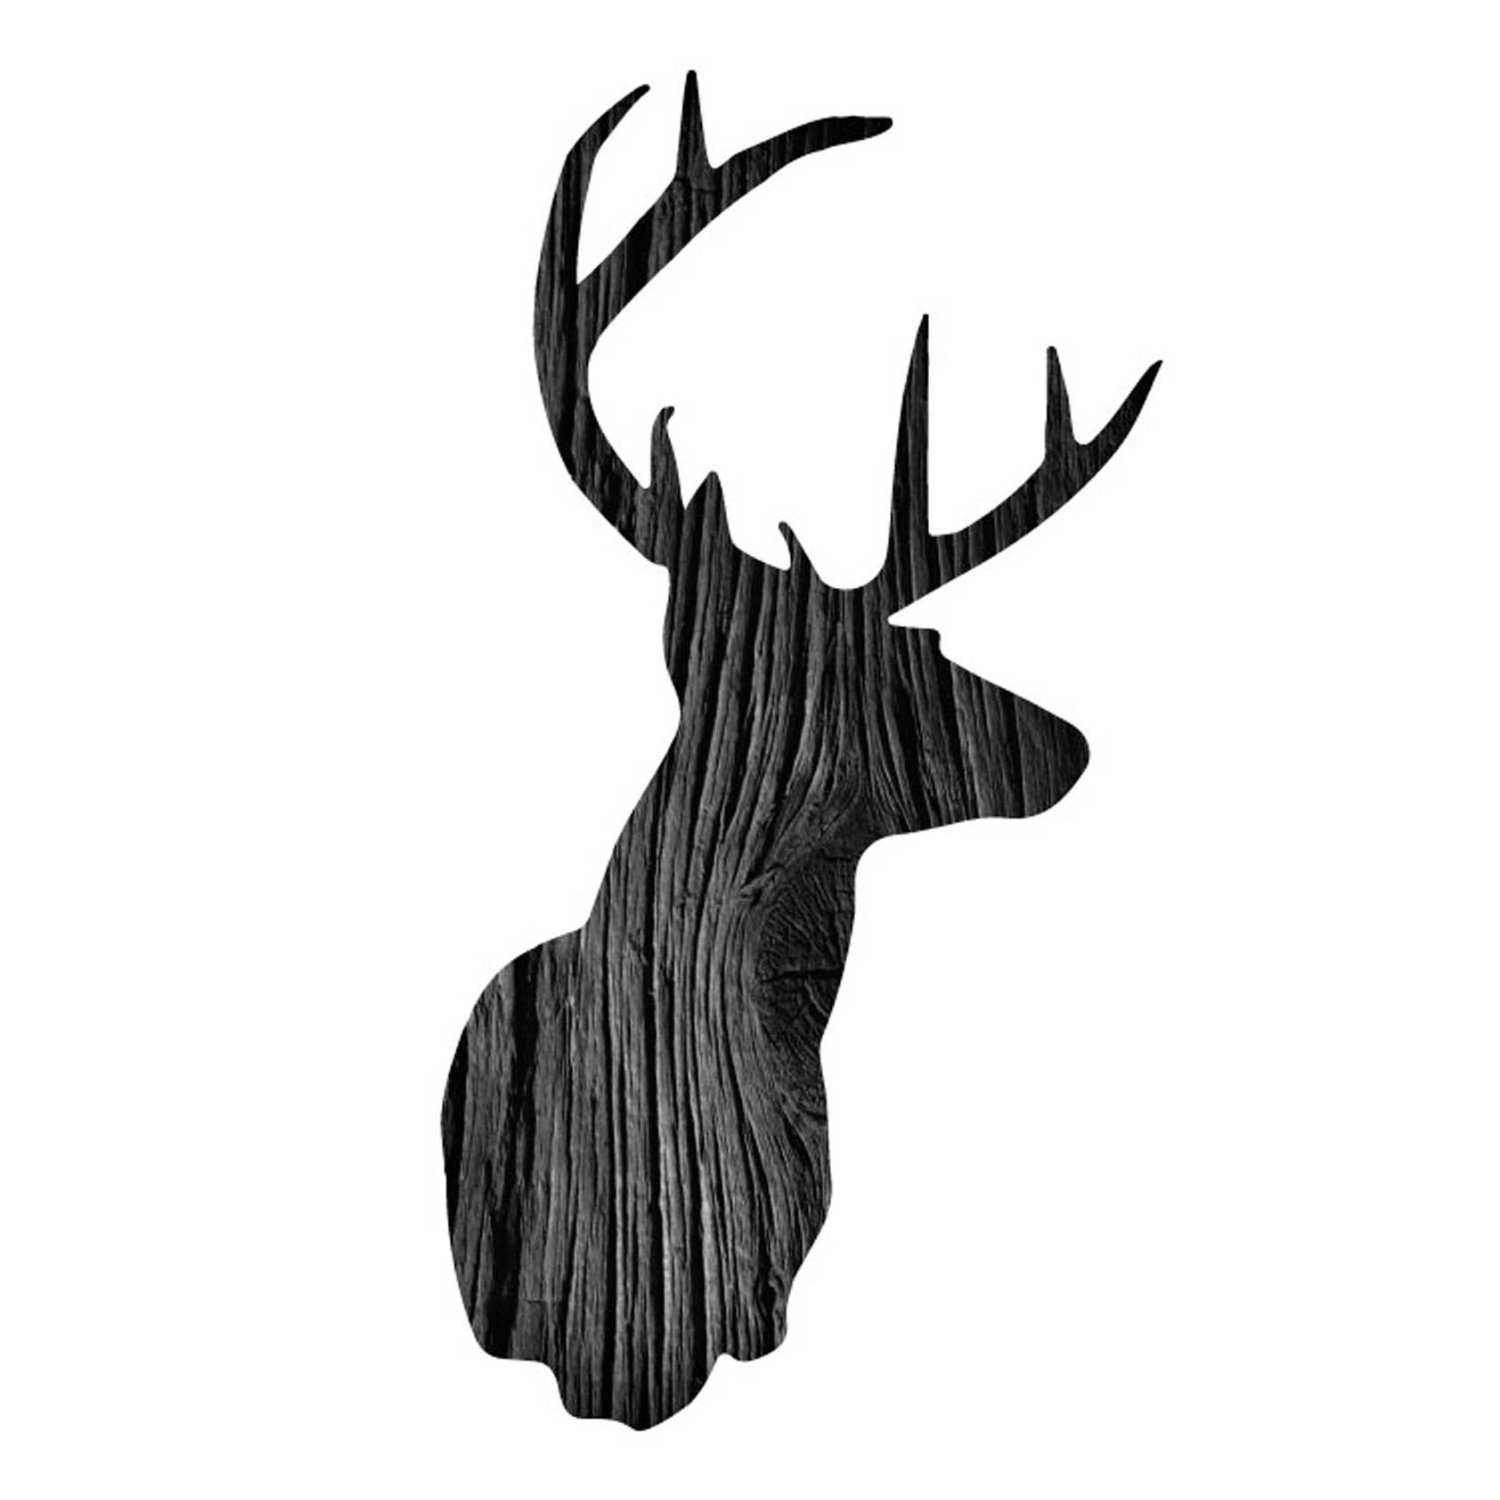 - Deer Head Silhouette in Black and White Wood Texture.